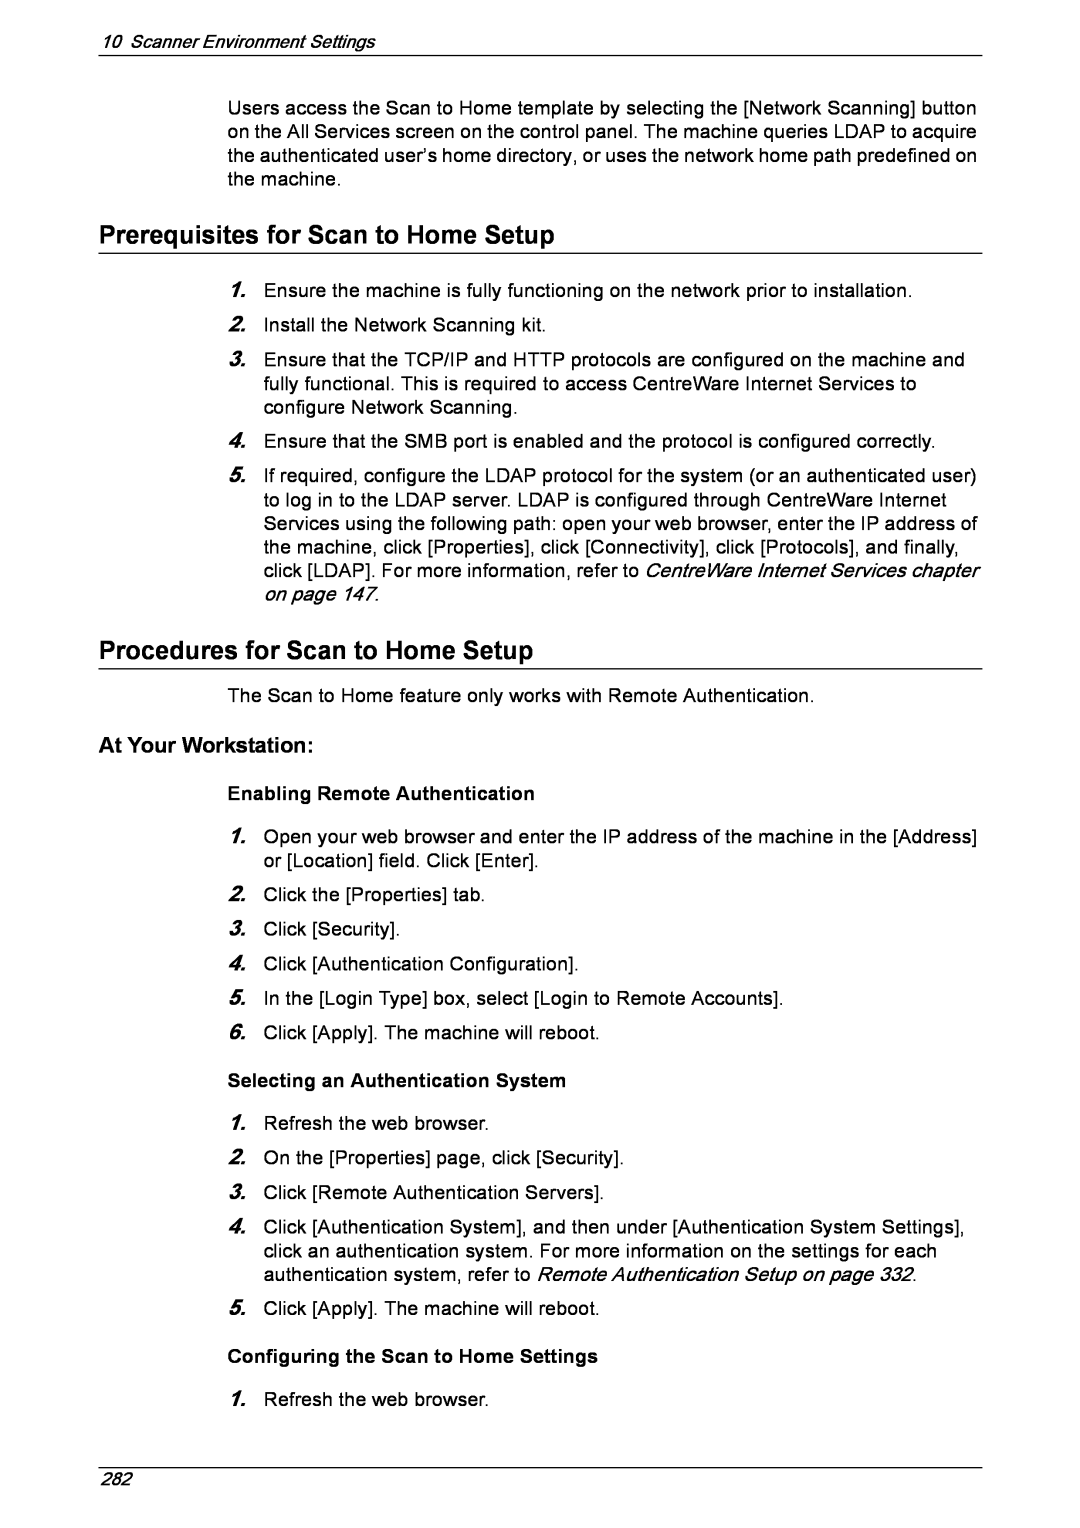 Xerox 5222 manual Prerequisites for Scan to Home Setup, Procedures for Scan to Home Setup, Enabling Remote Authentication 